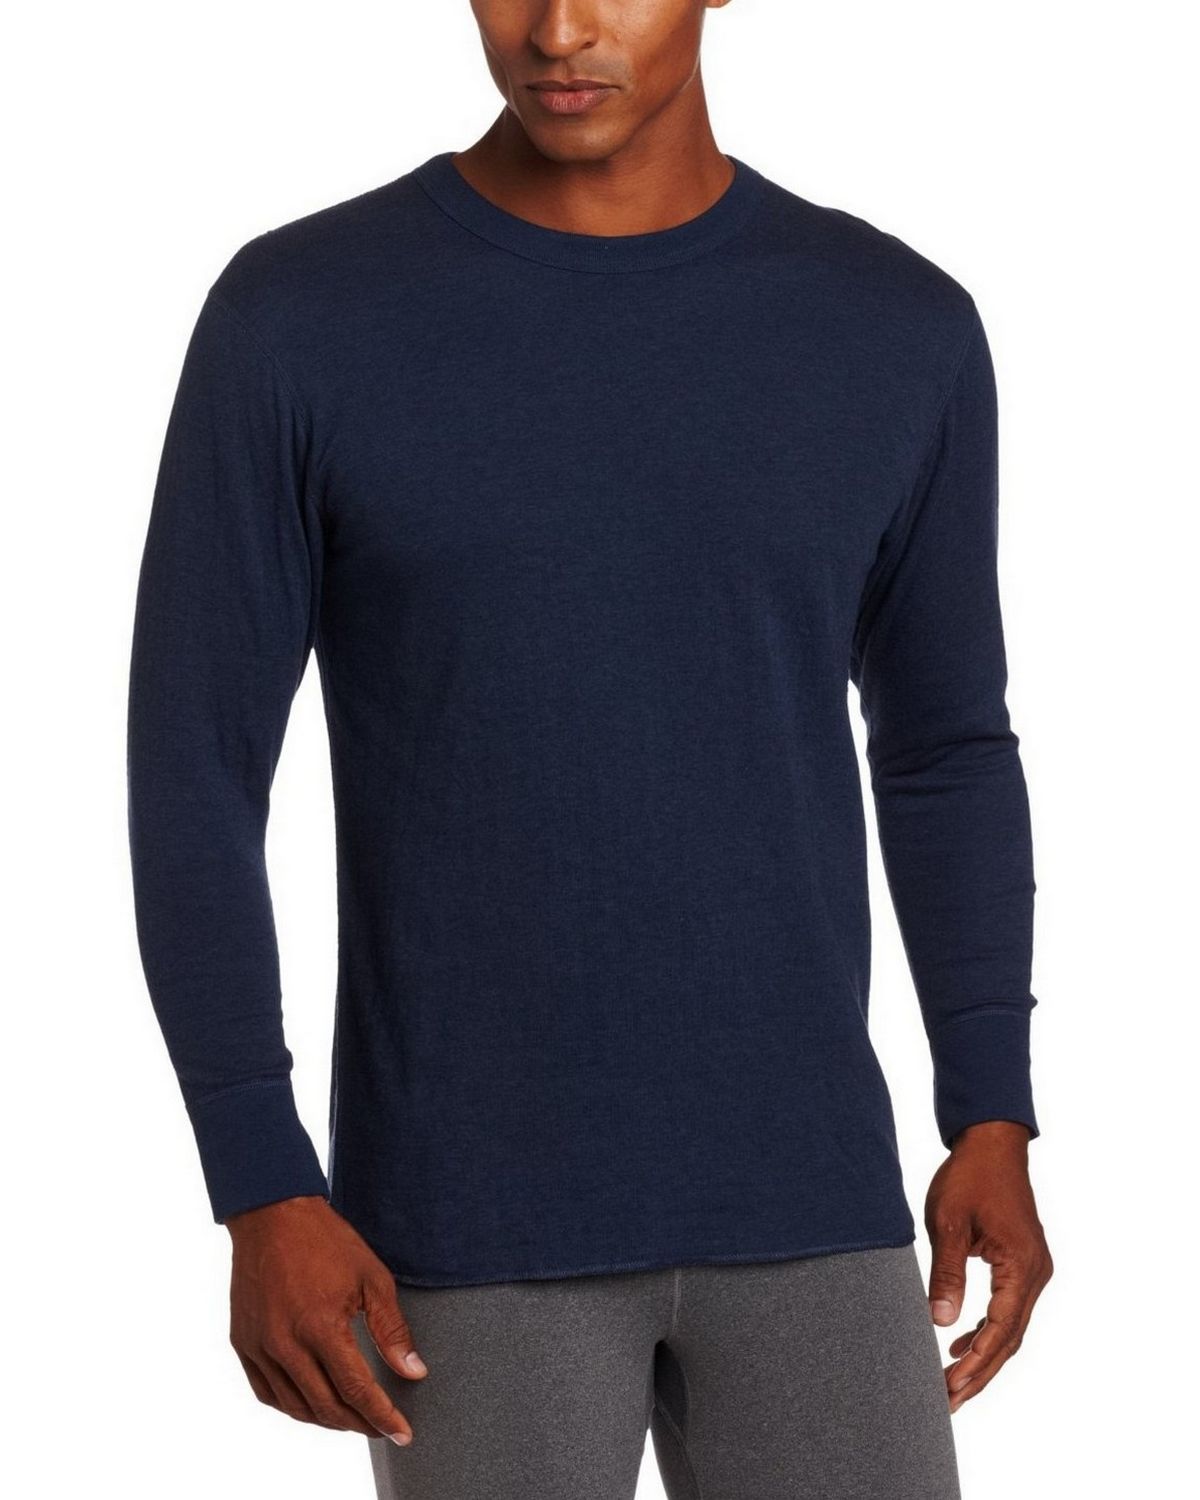 Duofold Mens Big-Tall Mid Weight Crew Thermal Top 